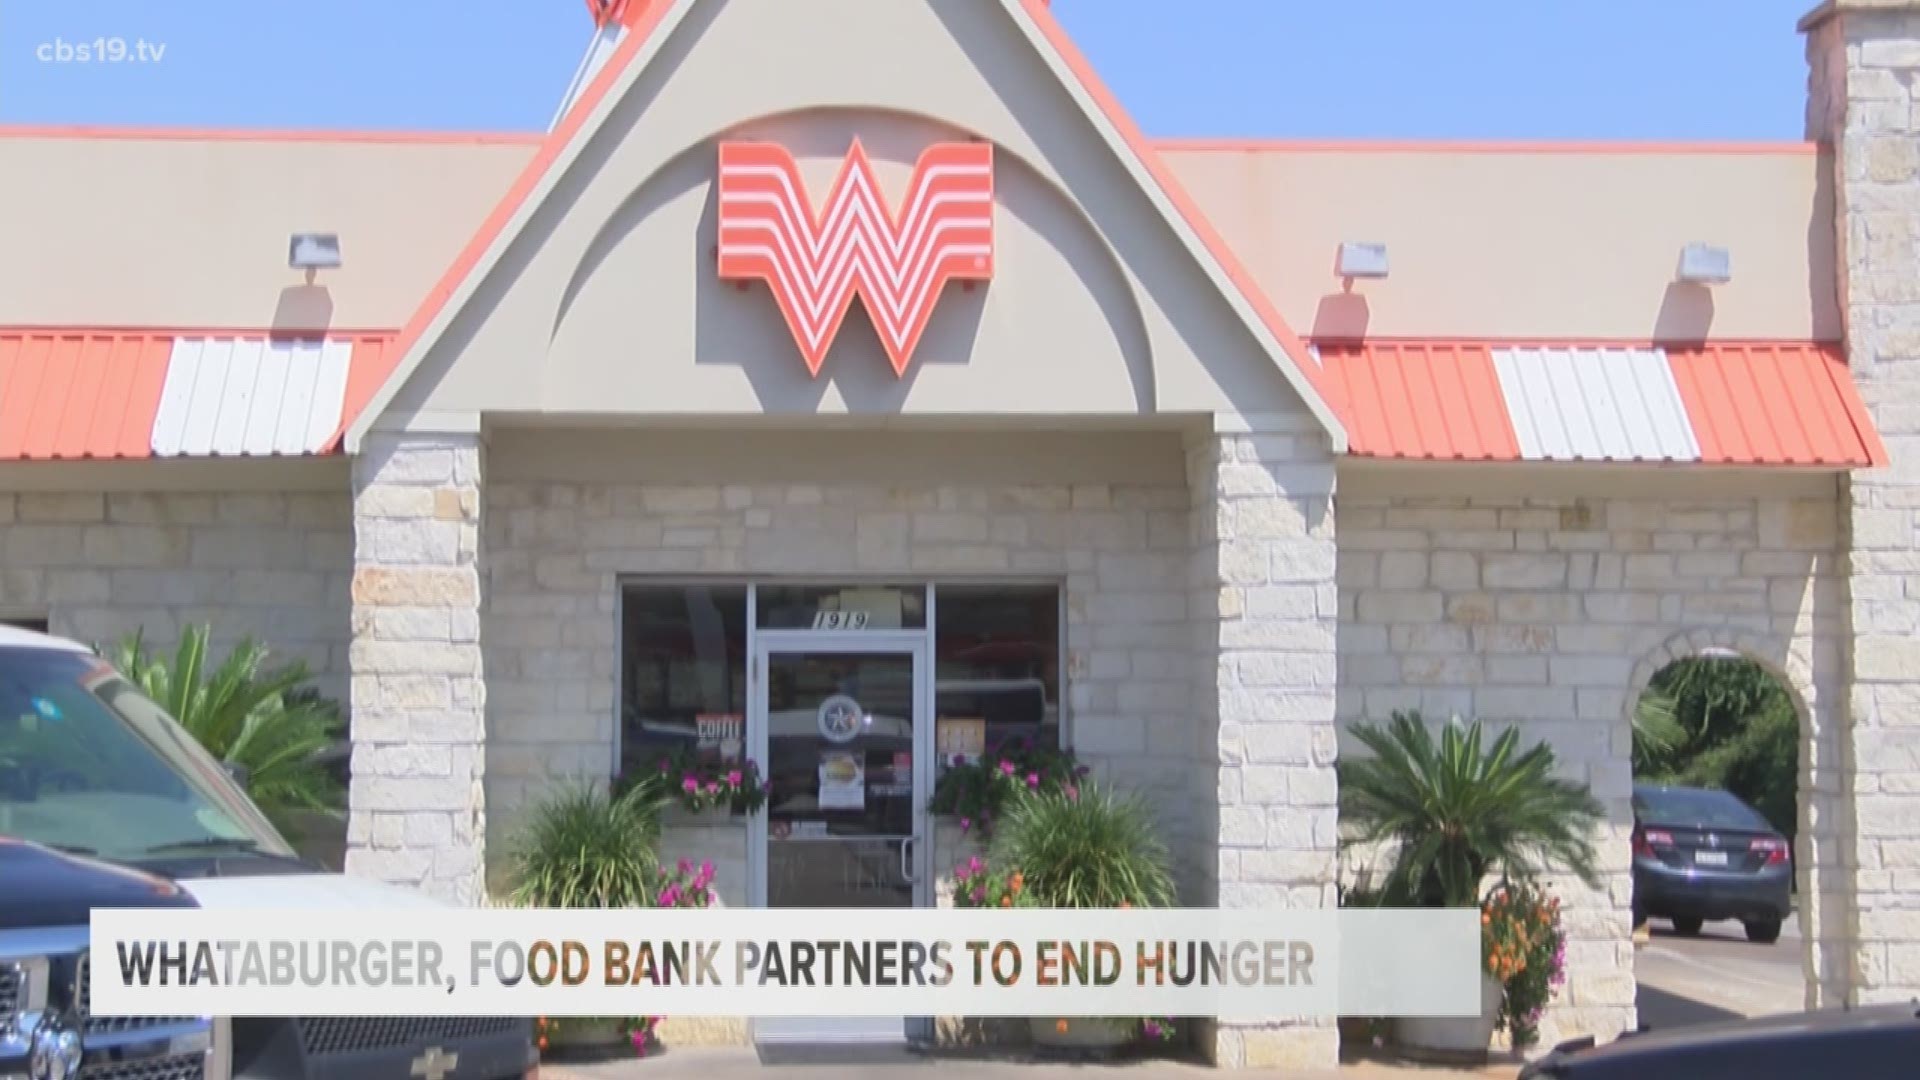 Free Whataburger for two can donation